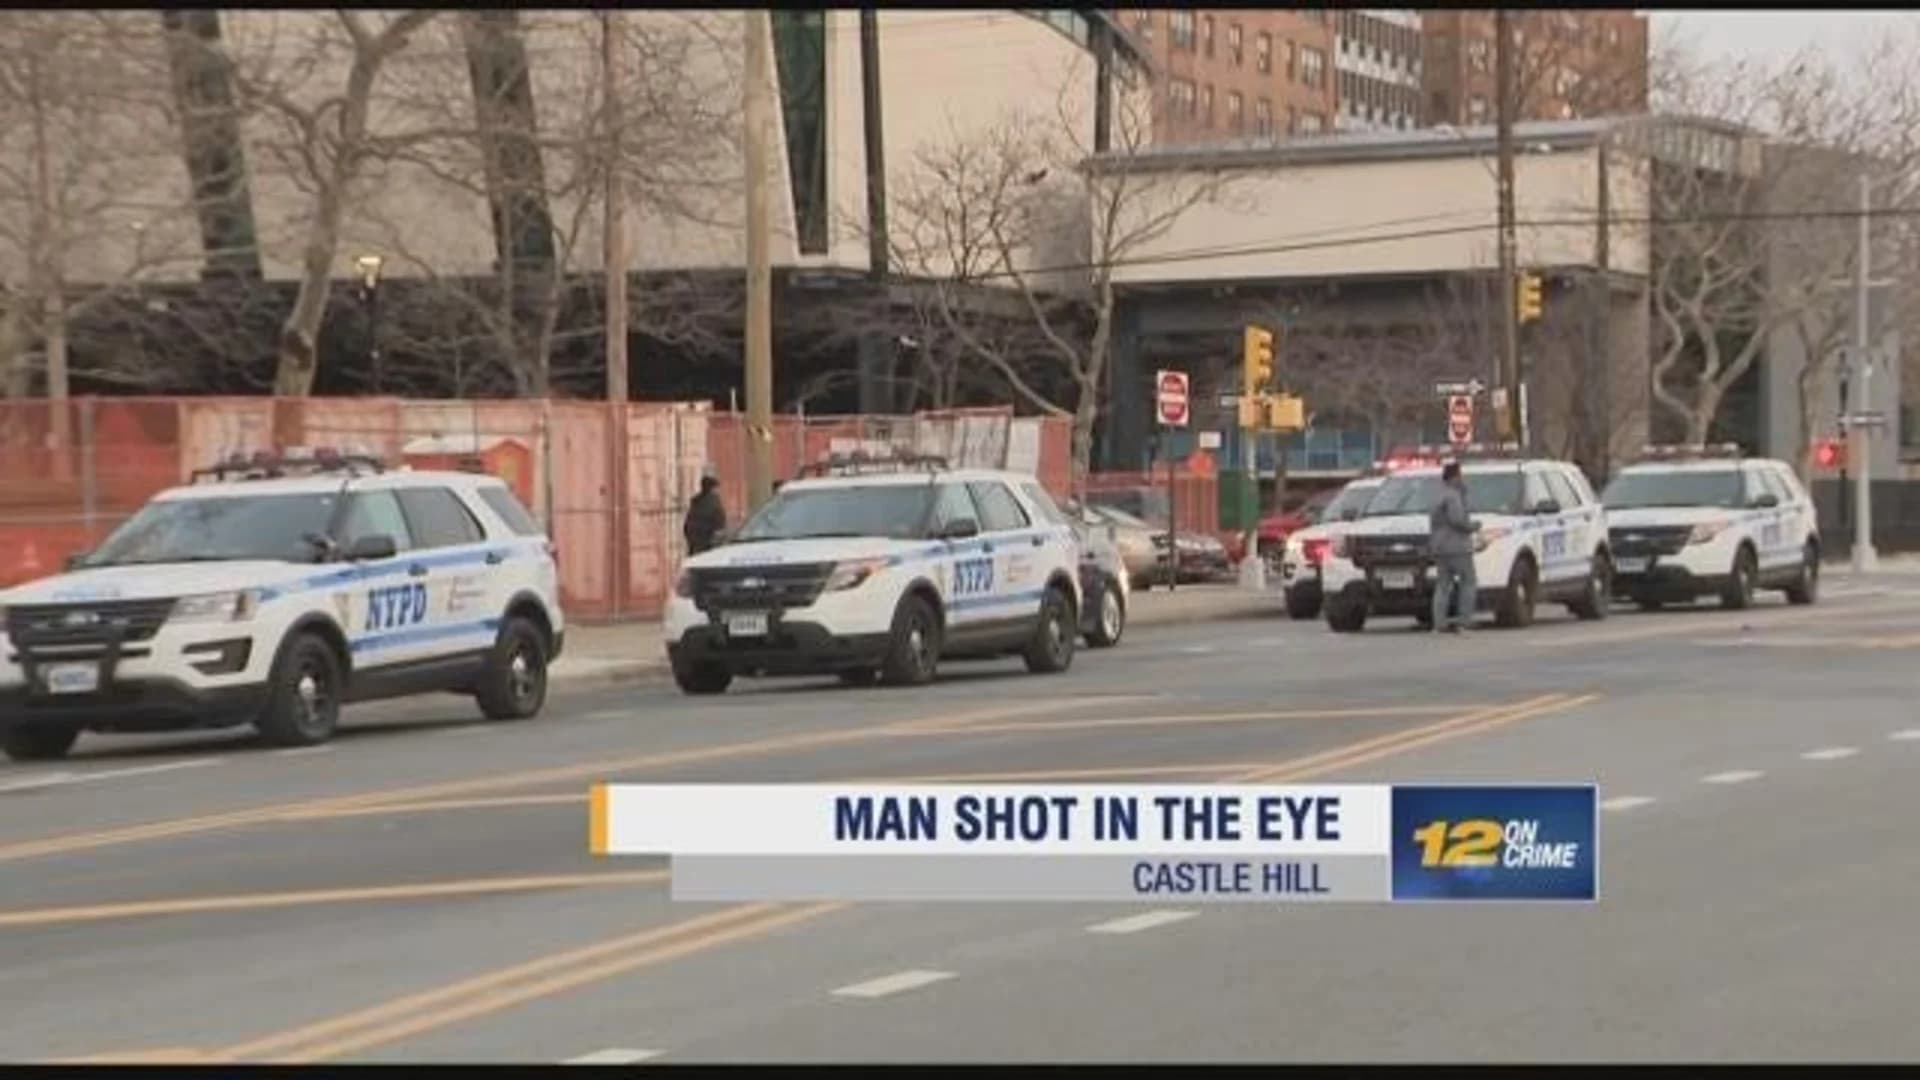 Police search for suspect who shot man in the eye in Castle Hill